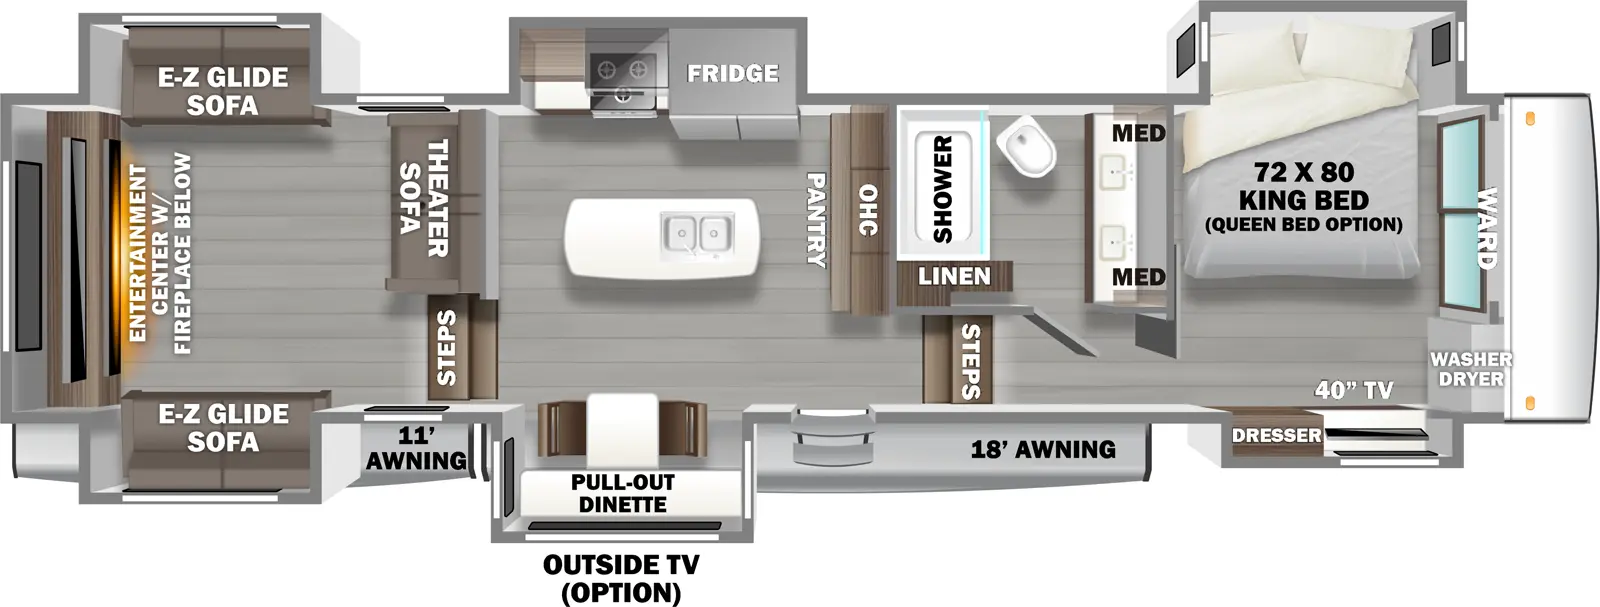 The 419RD has 6 slideouts and one entry. Exterior features an 11 foot awning, and 18 foot awning, and an optional outside TV. Interior layout front to back: wardrobe with washer/dryer, off-door side king bed slideout (optional queen bed), and door side slideout with dresser and TV; off-door side full bathroom with dual sinks and medicine cabinets, and linen closet; steps down to main living area and entry; pantry and overhead cabinet along inner wall; kitchen island with sink; off-door side slideout with refrigerator, cooktop, and microwave; door side slideout with pull-out dinette; steps up to rear living room with theater sofa along inner wall, opposing E-Z glide sofa slideouts, and rear entertainment center with fireplace below.